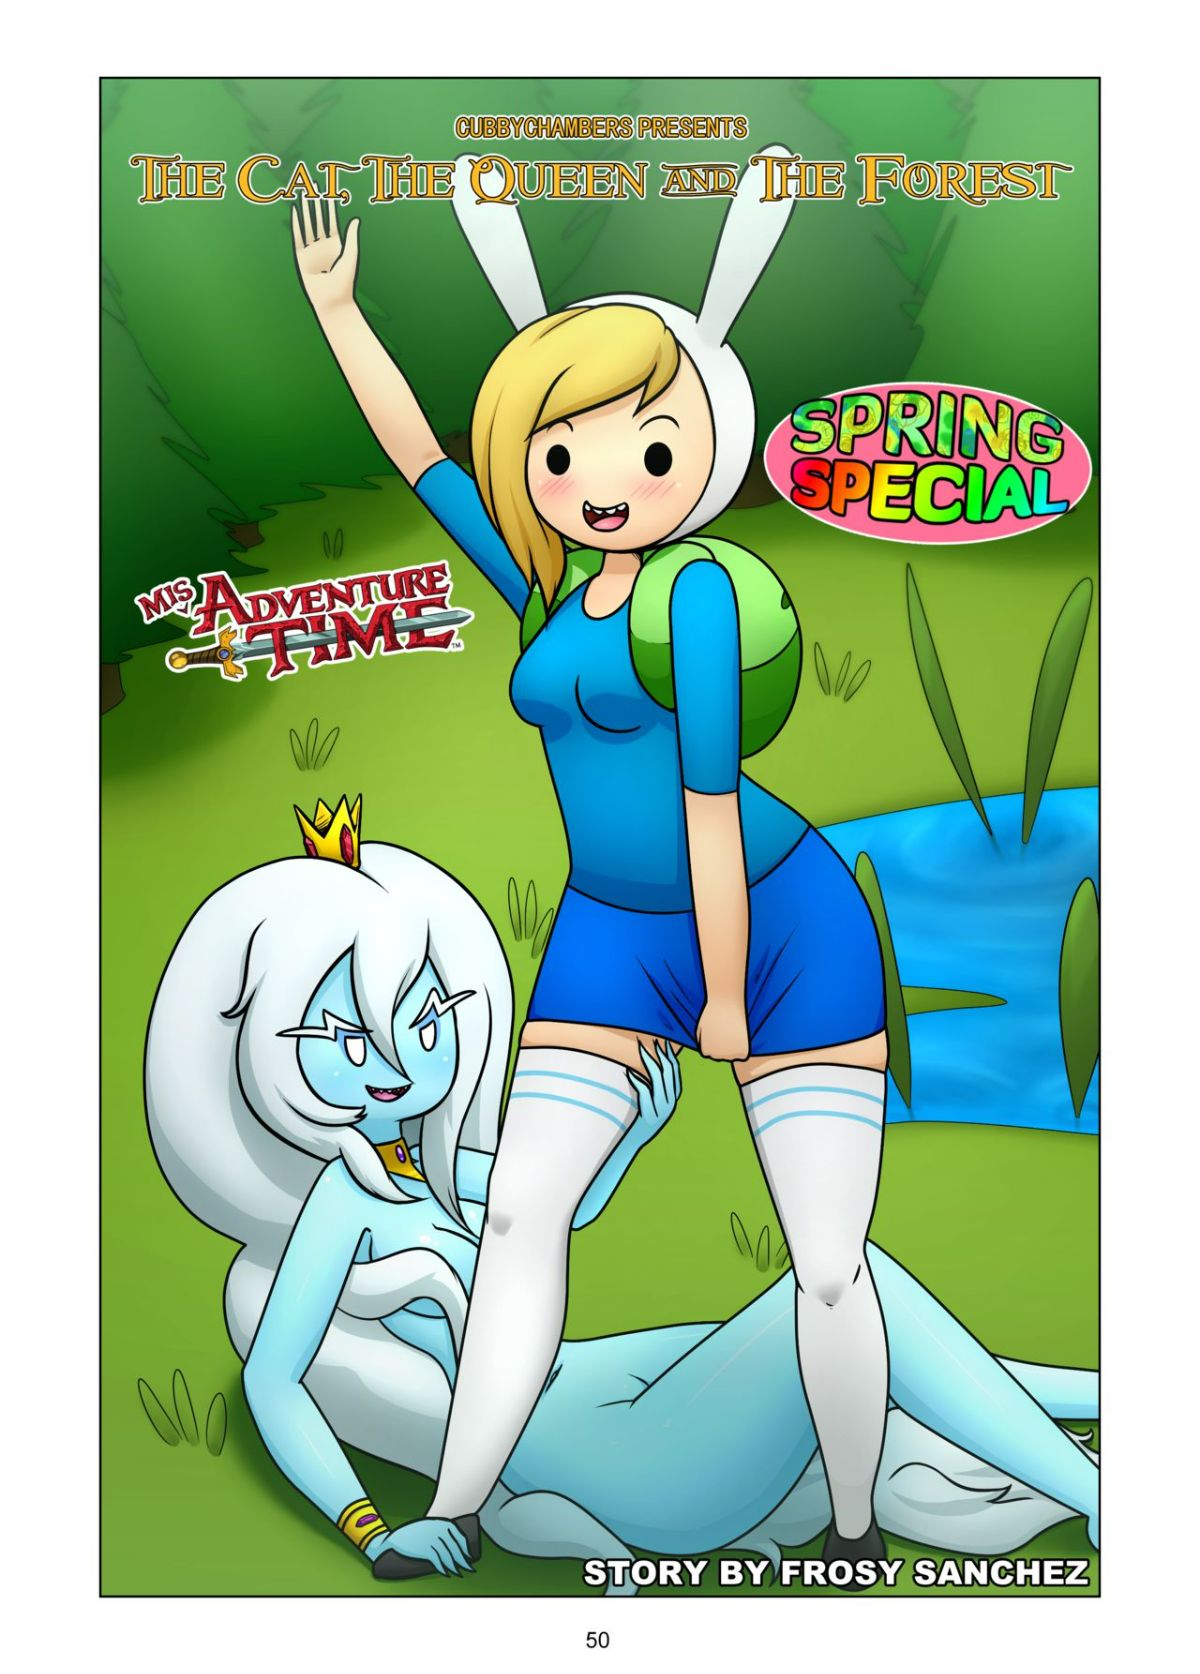 MisAdventure Time: Spring Special (Adventure Time) [Cubby Chambers] -  English - Porn Comic